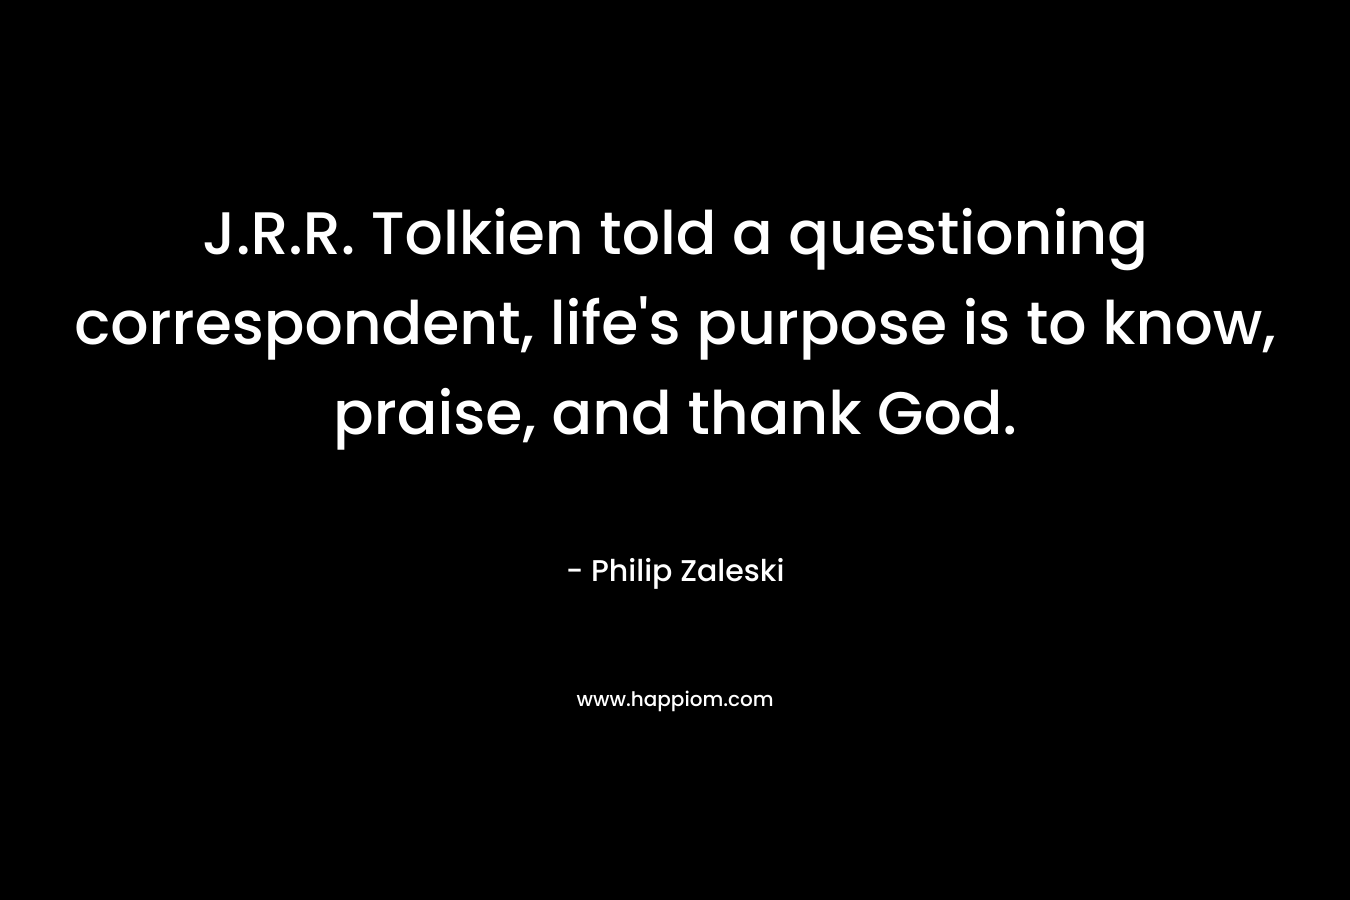 J.R.R. Tolkien told a questioning correspondent, life’s purpose is to know, praise, and thank God. – Philip Zaleski